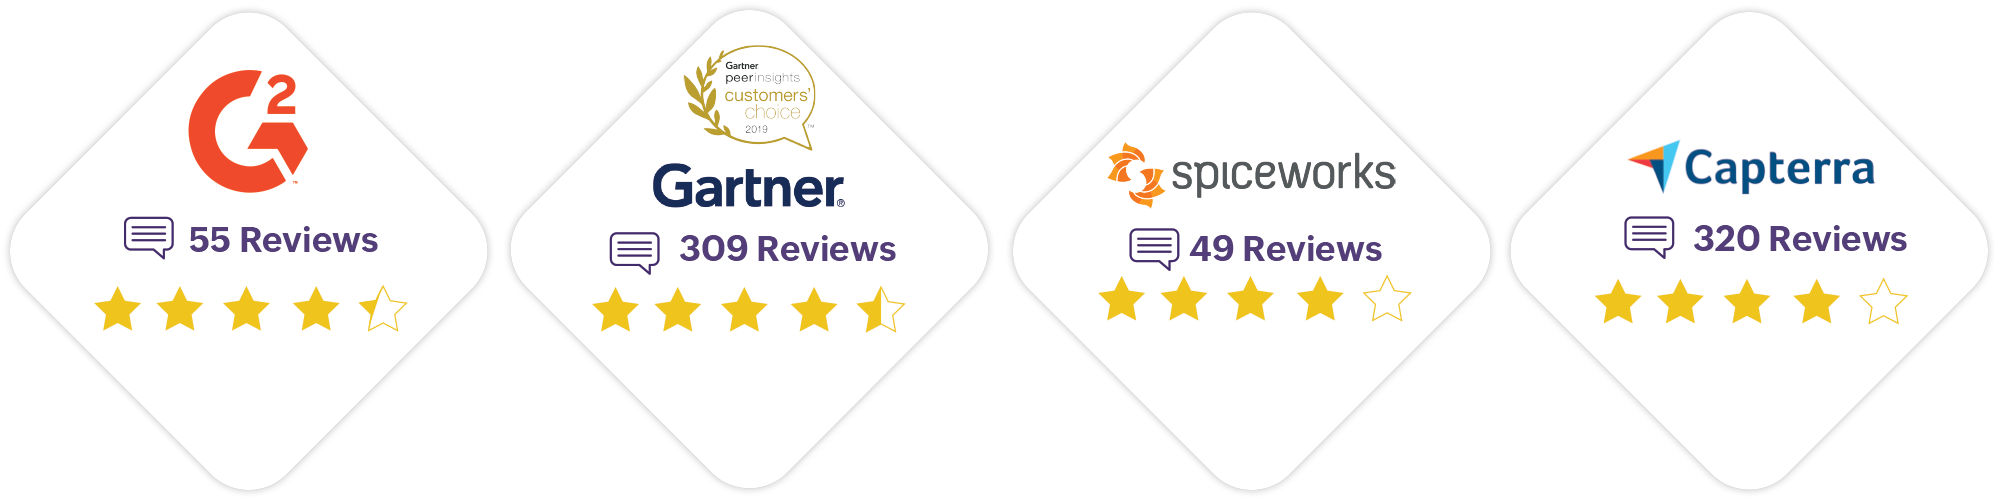 Review us on Gartner Peer Insights to win a 25 Amazon gift card for a